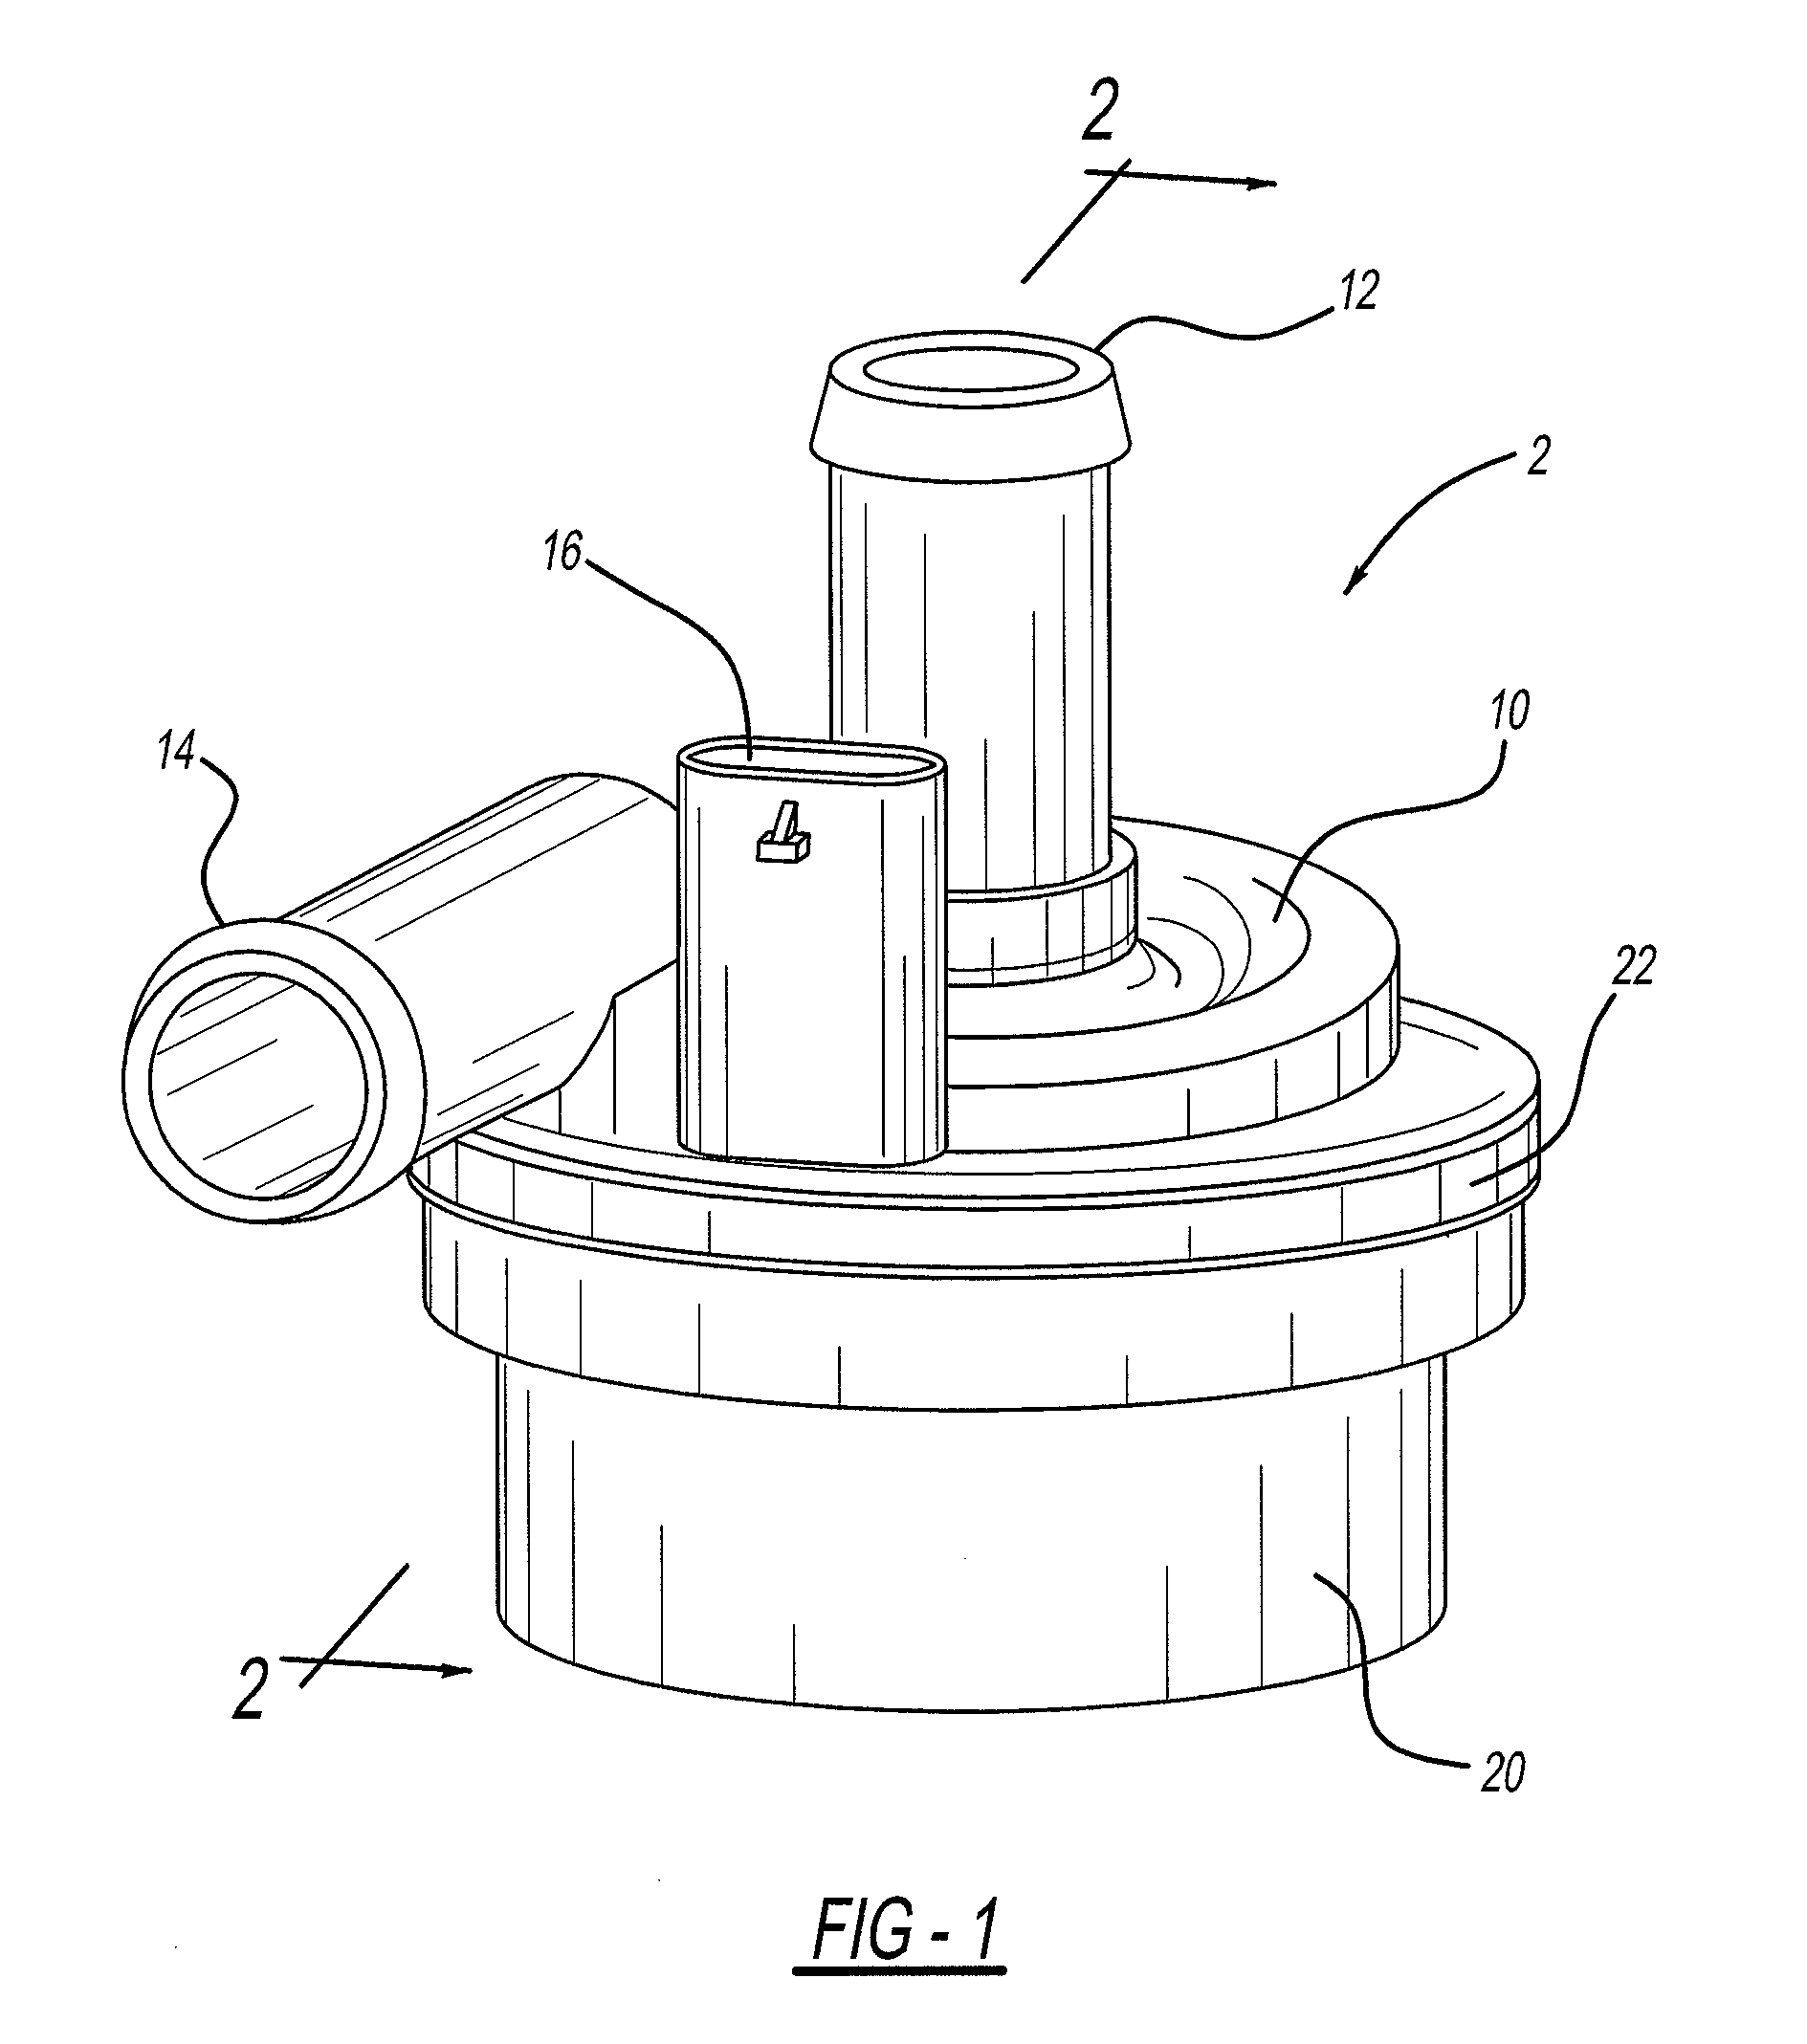 Submerged rotor electric water pump with structural wetsleeve